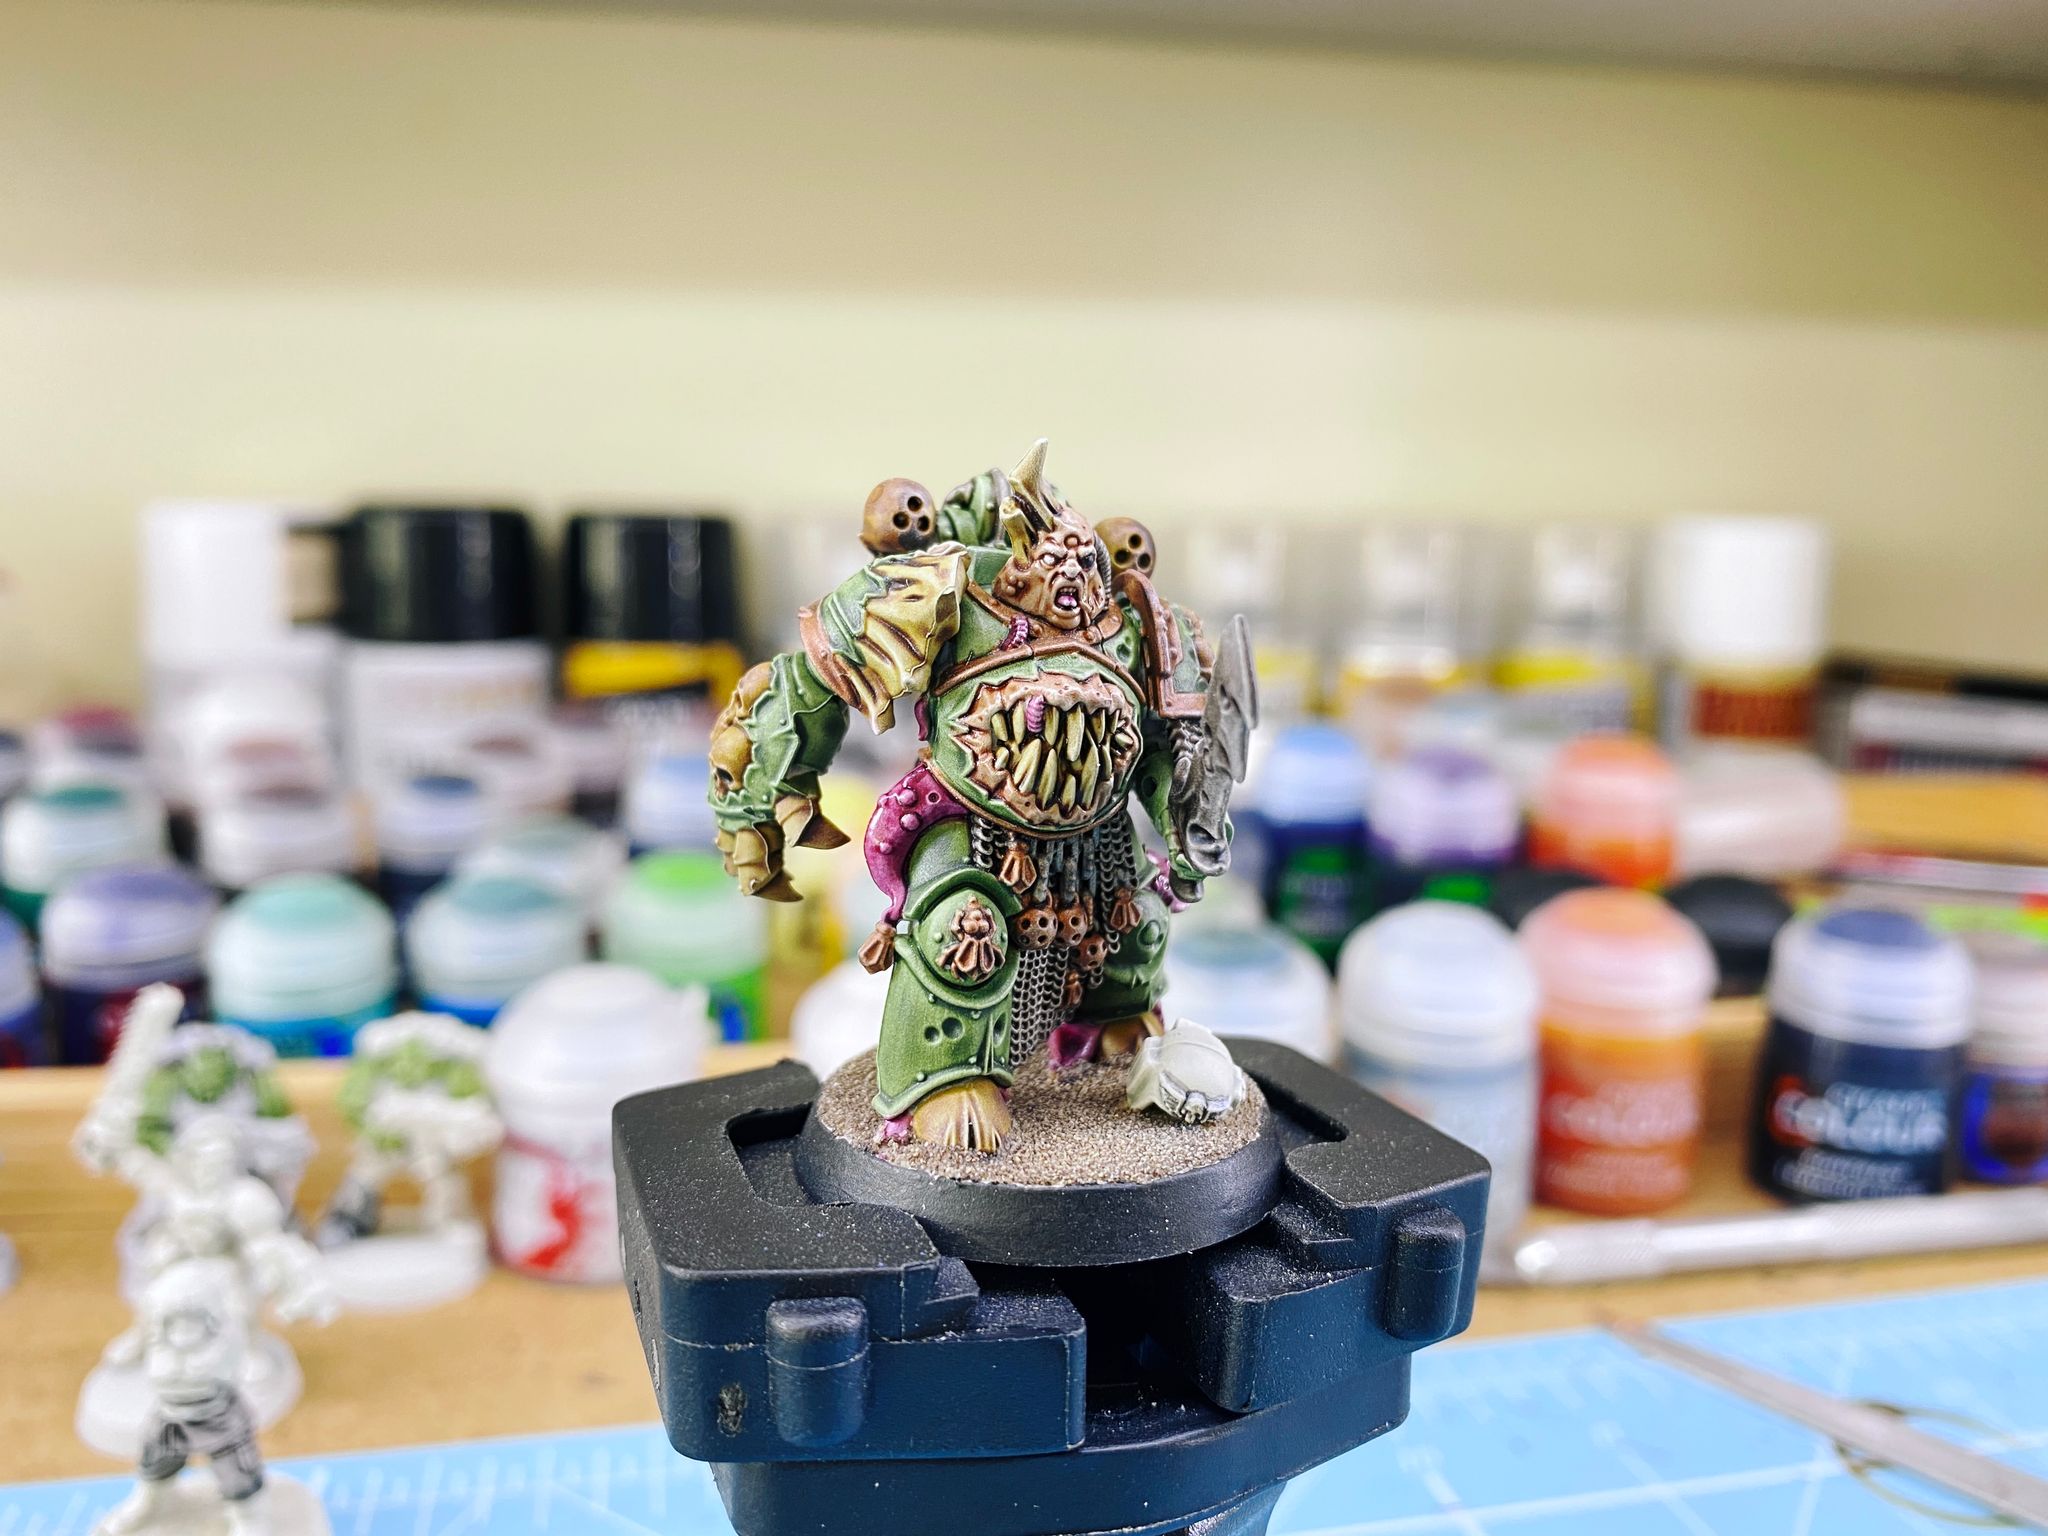 A photo of a Plague Marine from Warhammer 40,000. He's got green armour with skulls in various places, plus horns ripping through the armour on one shoulder and purple tentacles coming out from various armour joints. His head is corpulent and has pustules on it, and his abdomen has a large mouth with teeth bursting through the armour there. On the base is a white Imperial Guard helmet lying on the ground as though he's just killed them.